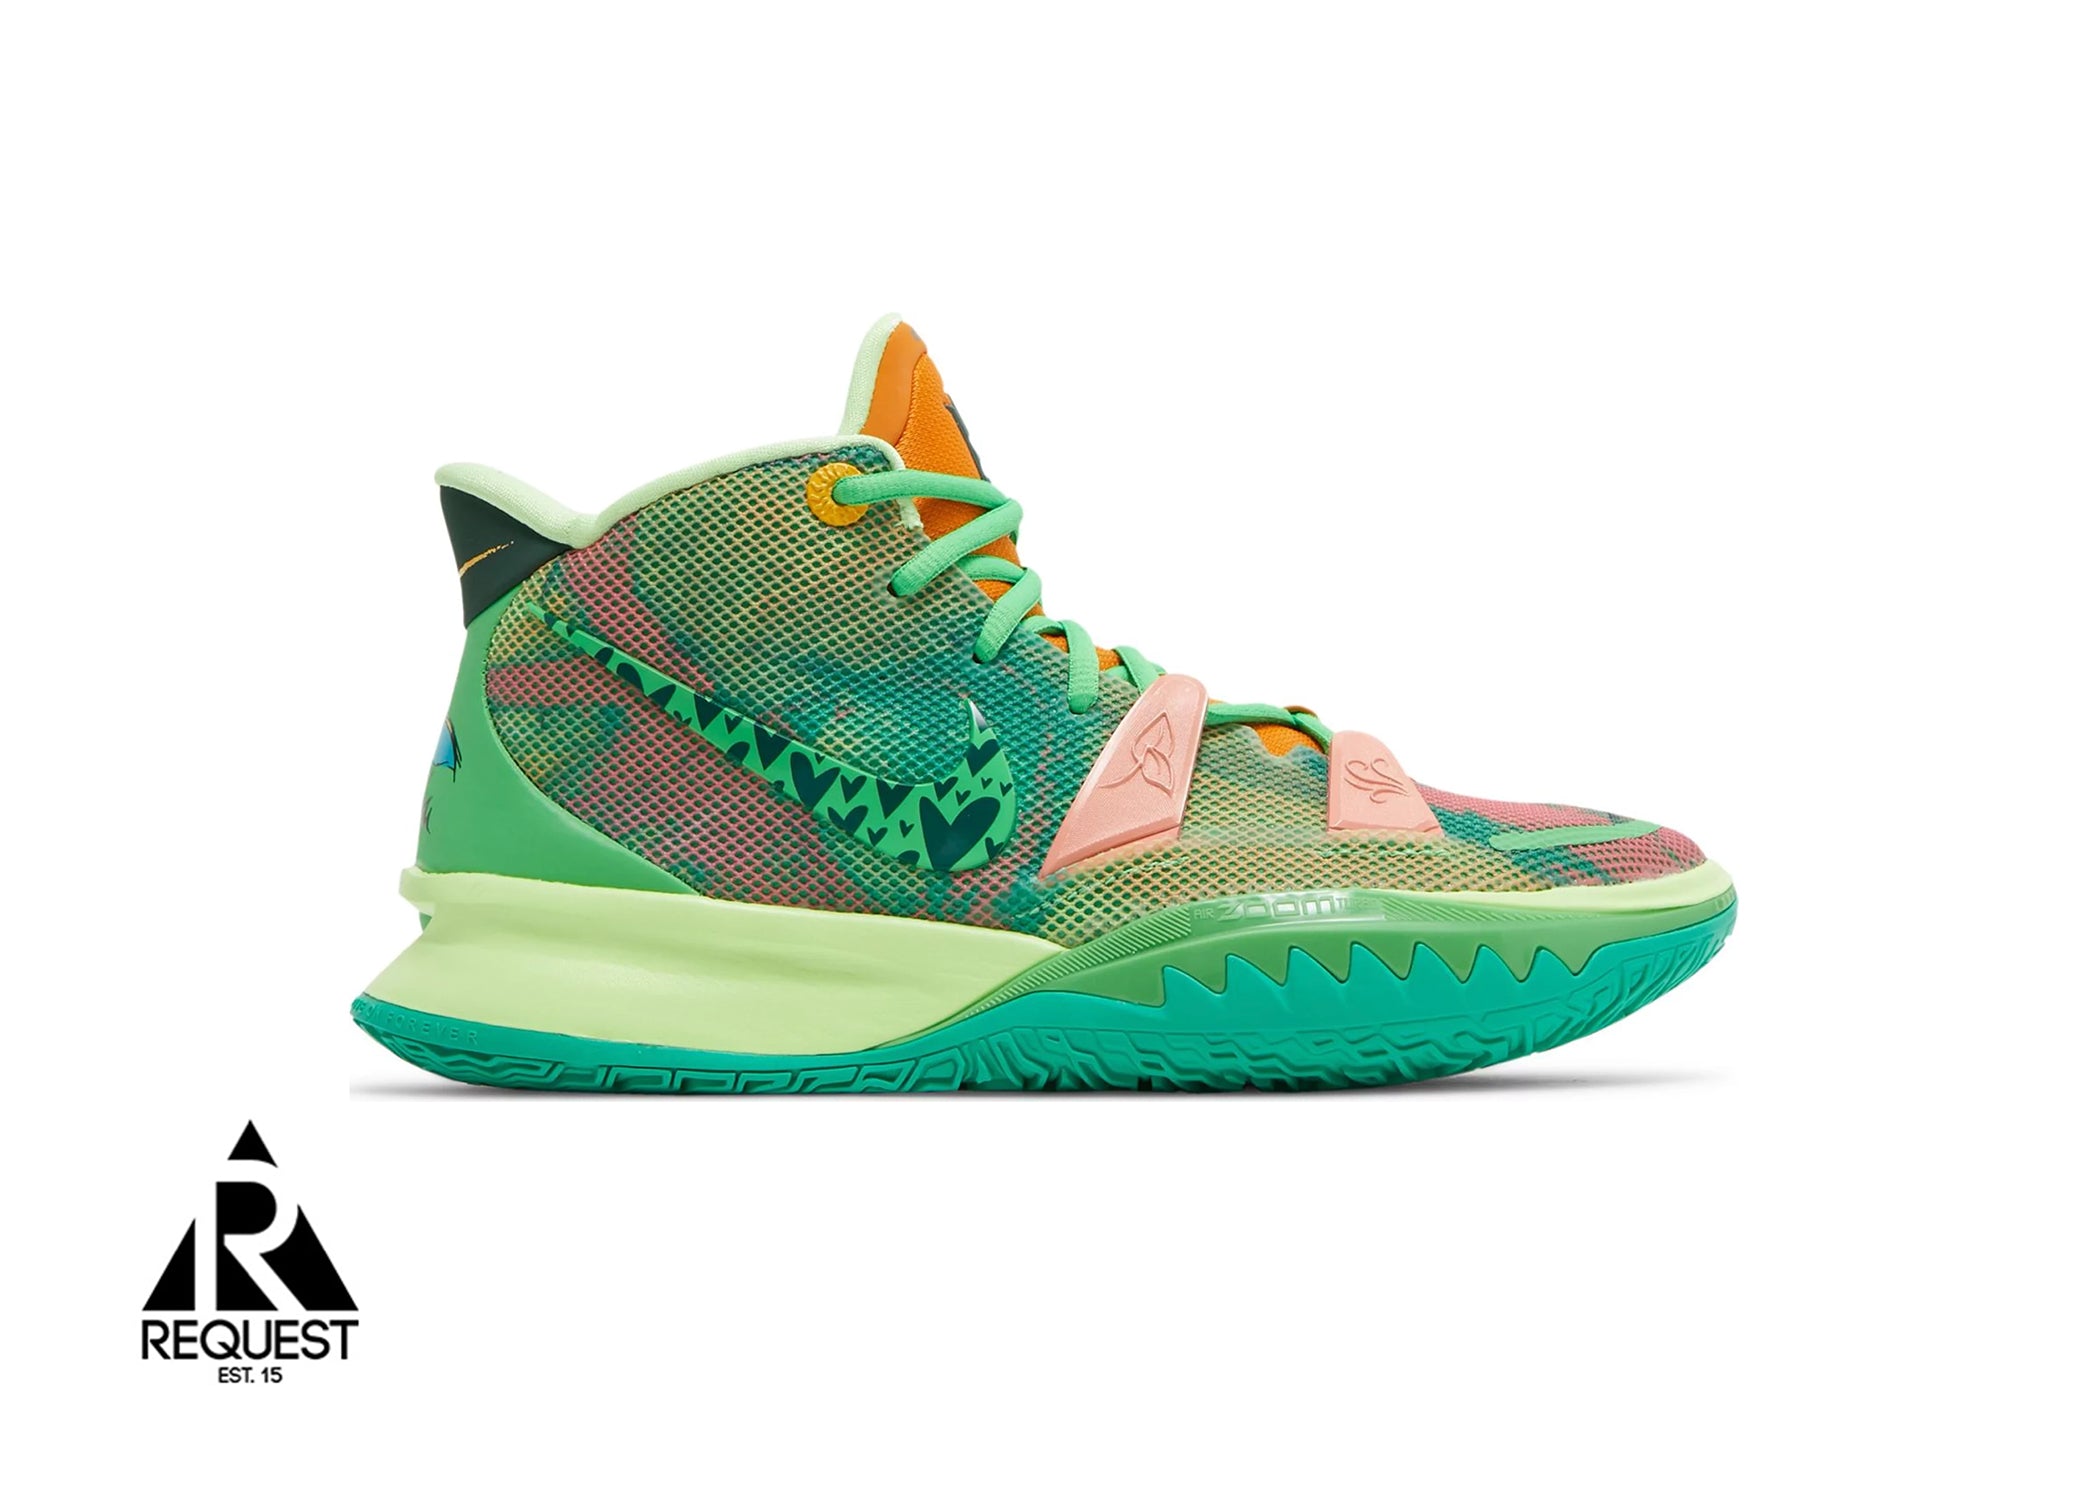 Nike Kyrie 7 “Sneaker Room Air and Earth”